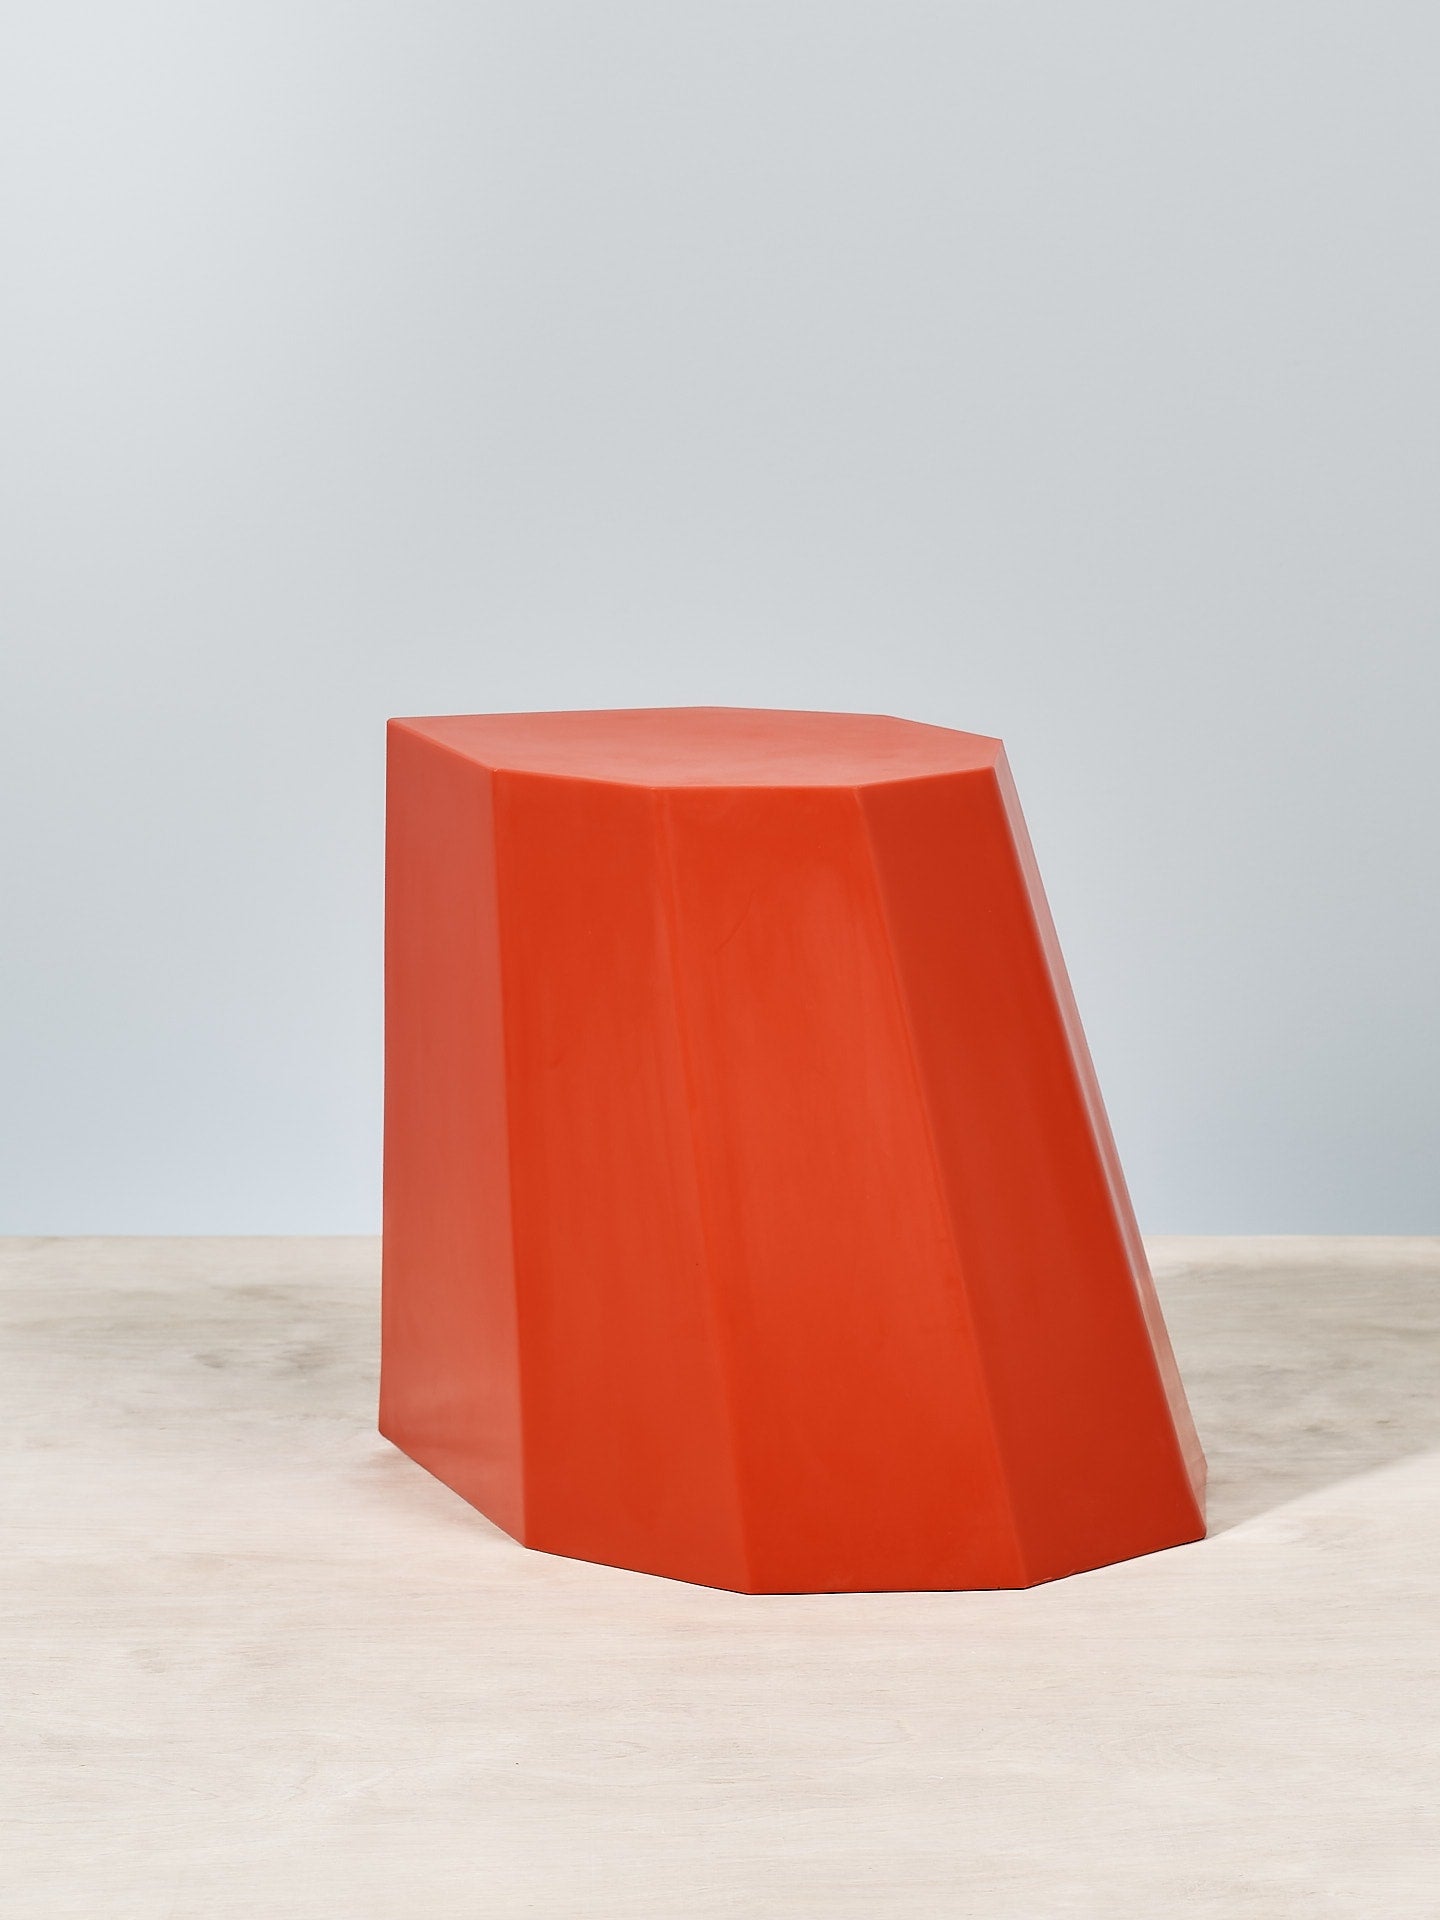 An Arnoldino Stool – Red by Martino Gamper sitting on top of a wooden table.